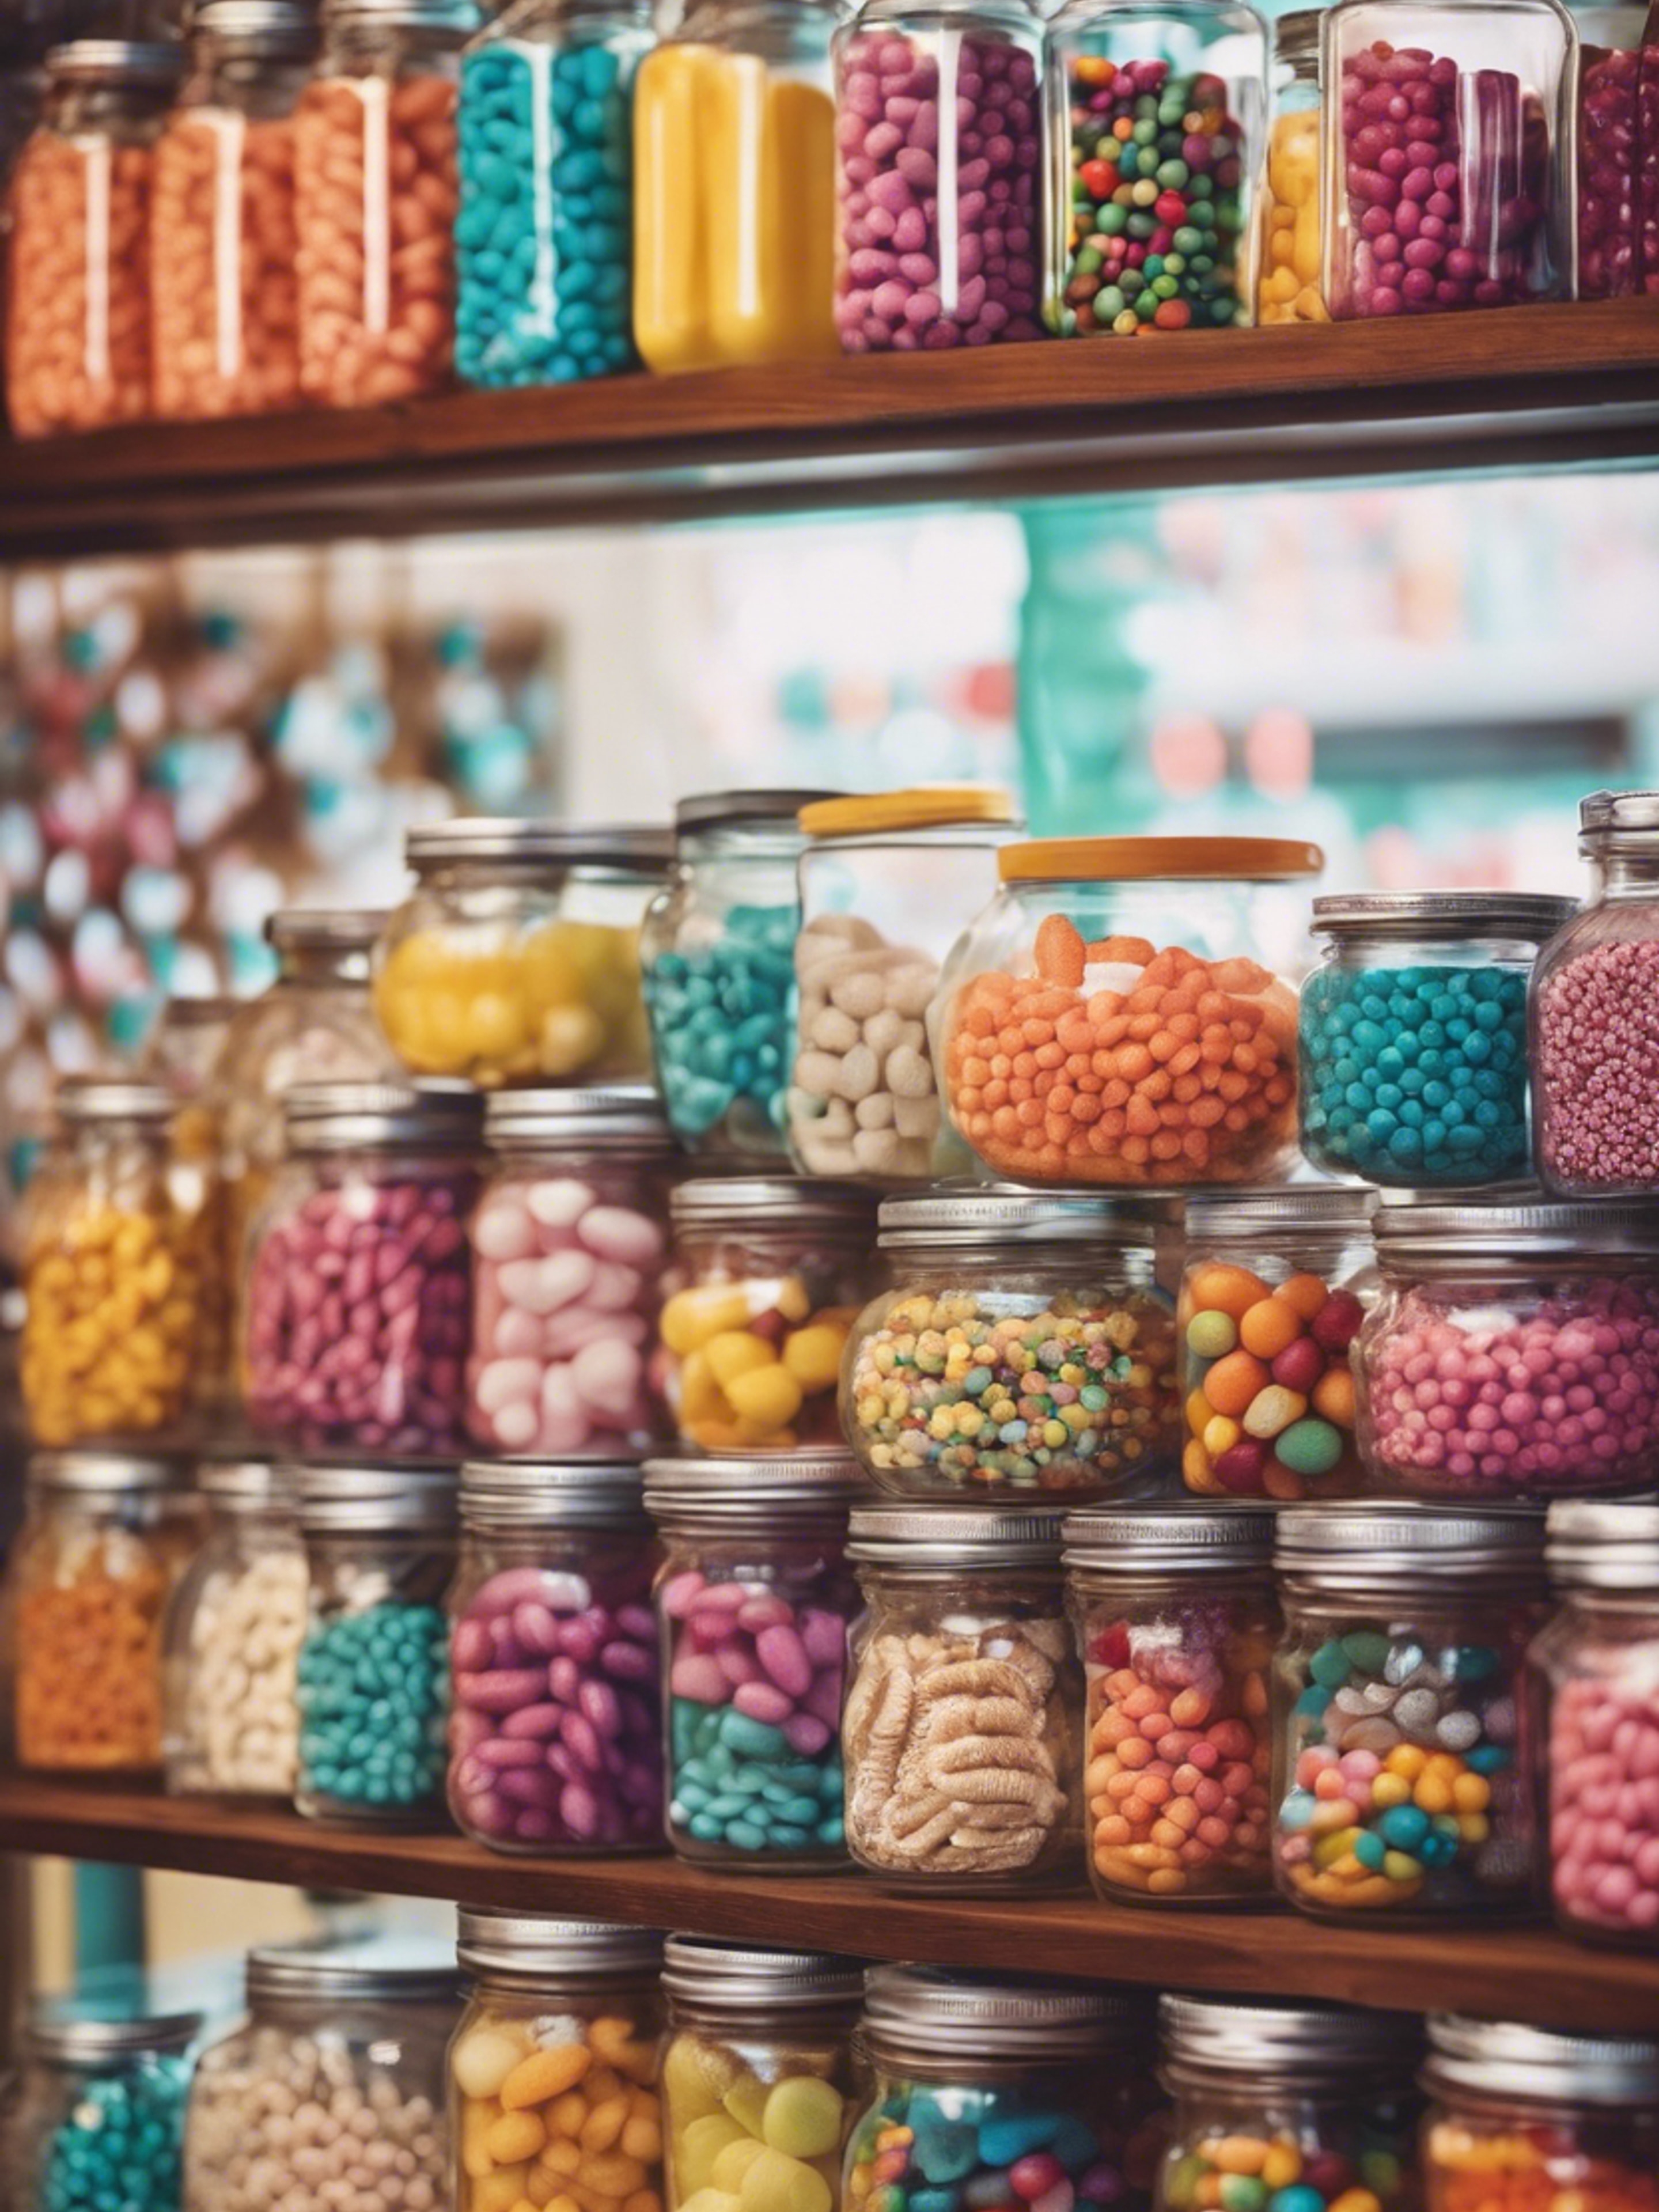 Retro candy store filled with jars of colorful treats. 벽지[53bdbe1ef5c6451abca1]